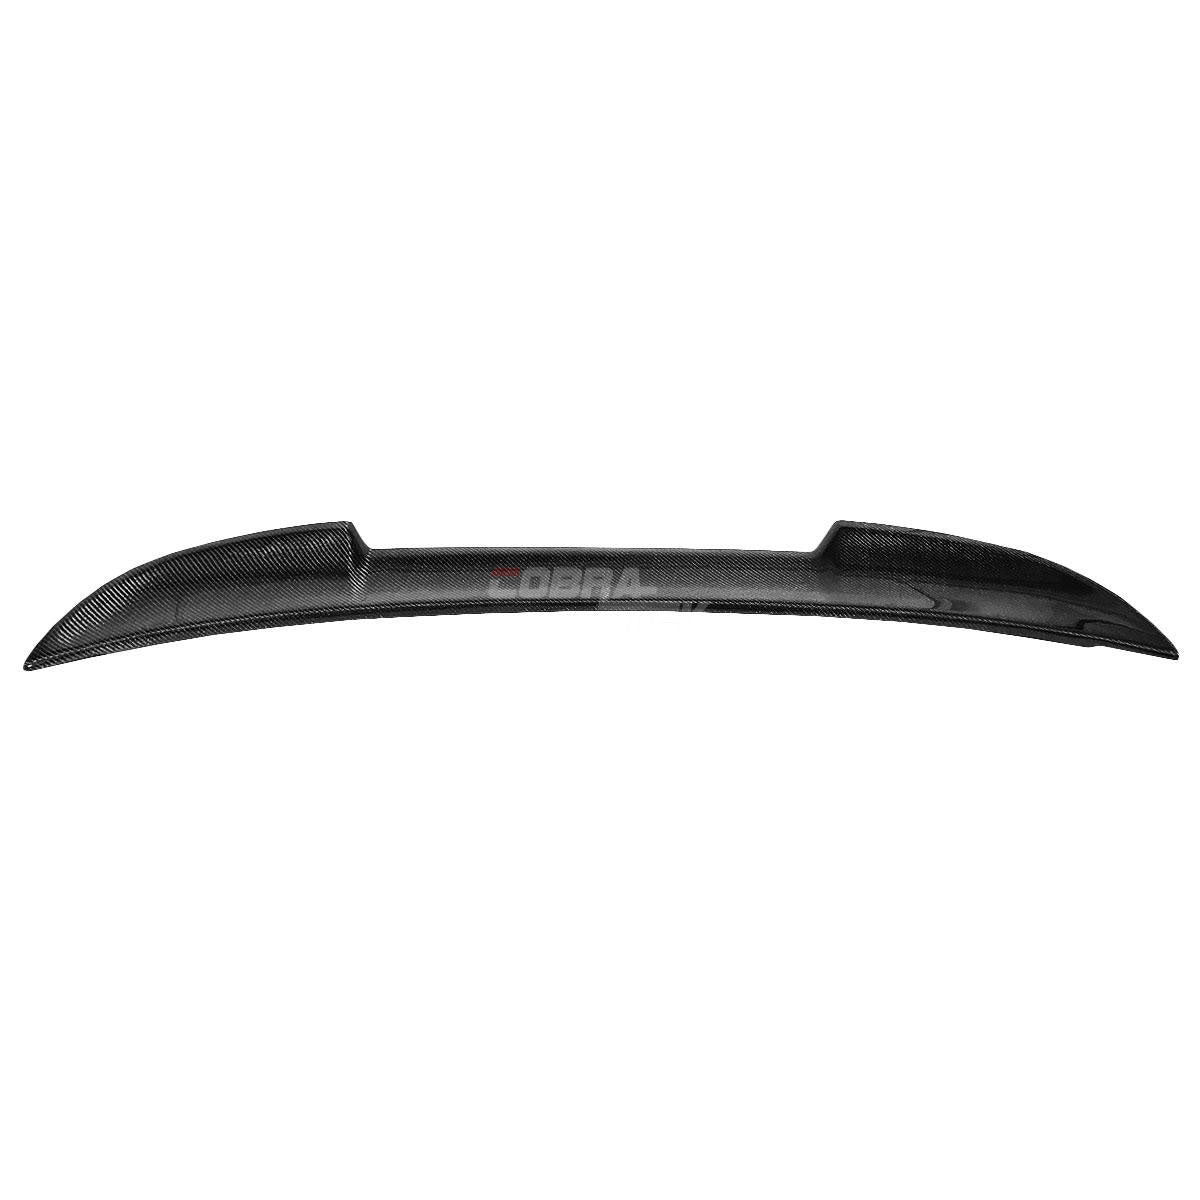 2015-2022 Ford Mustang - Real Carbon Fiber Rear Spoiler - MMD Style